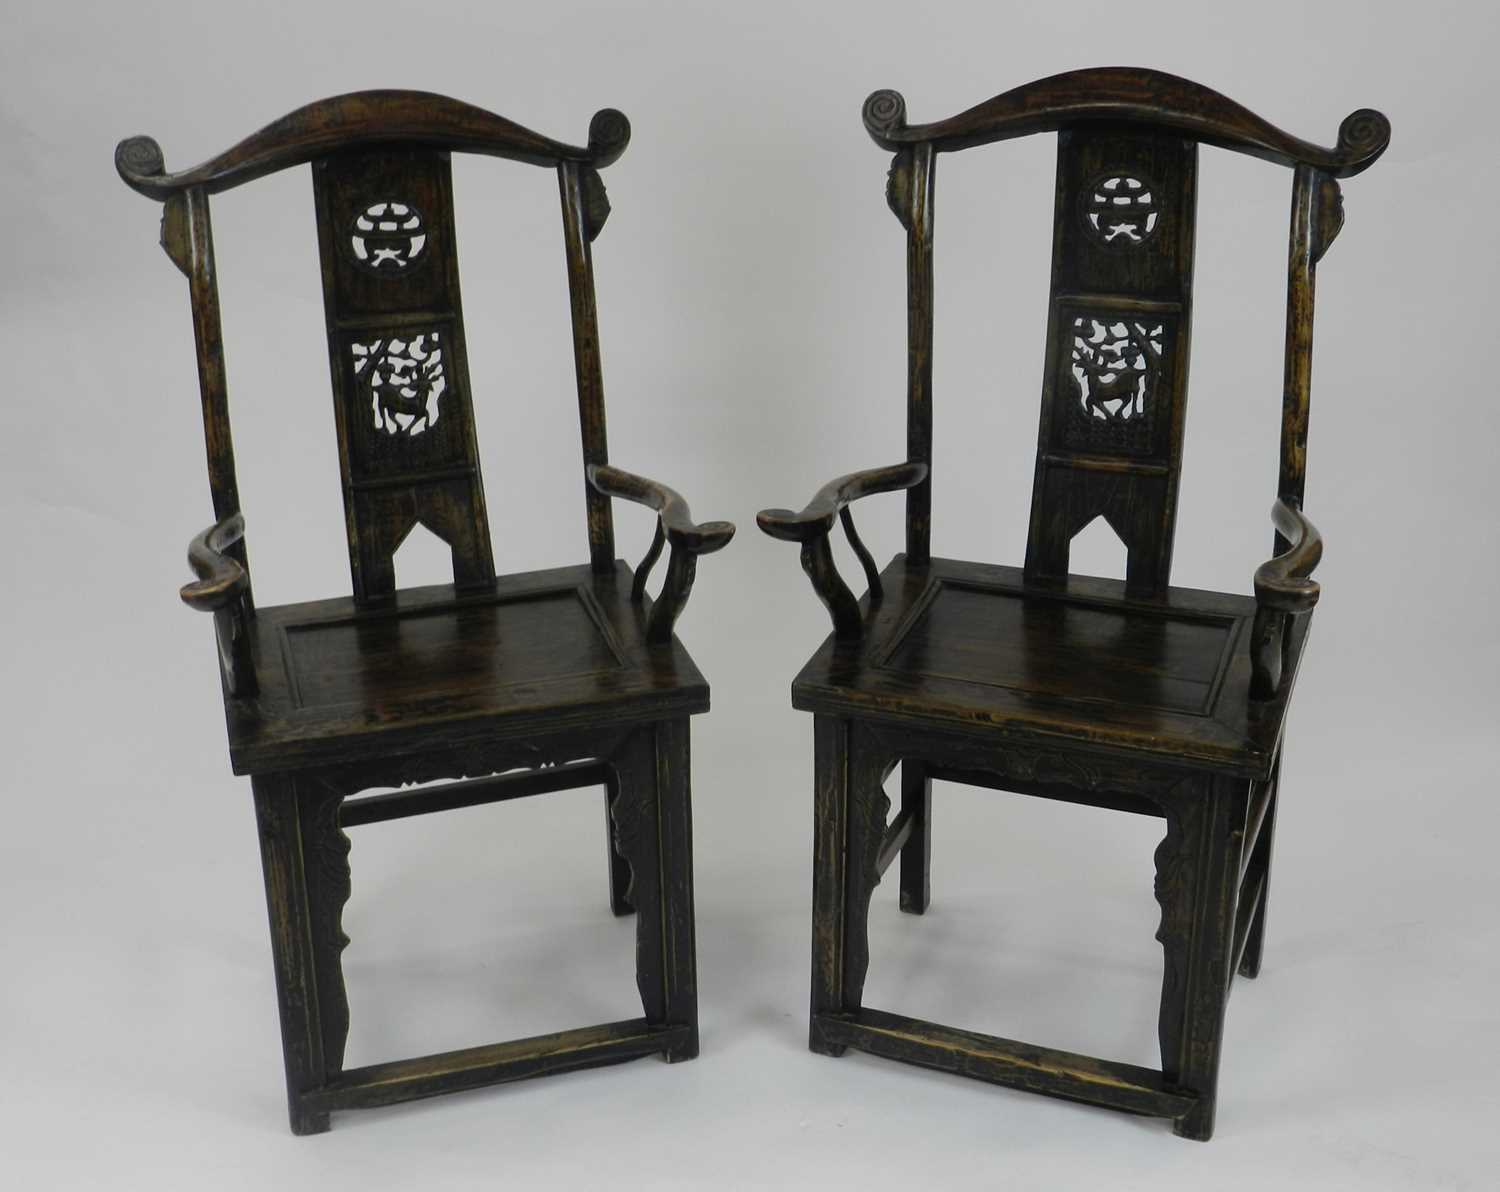 A pair of Chinese softwood armchairs, 20th century, possibly cedar wood, of yoke back form with